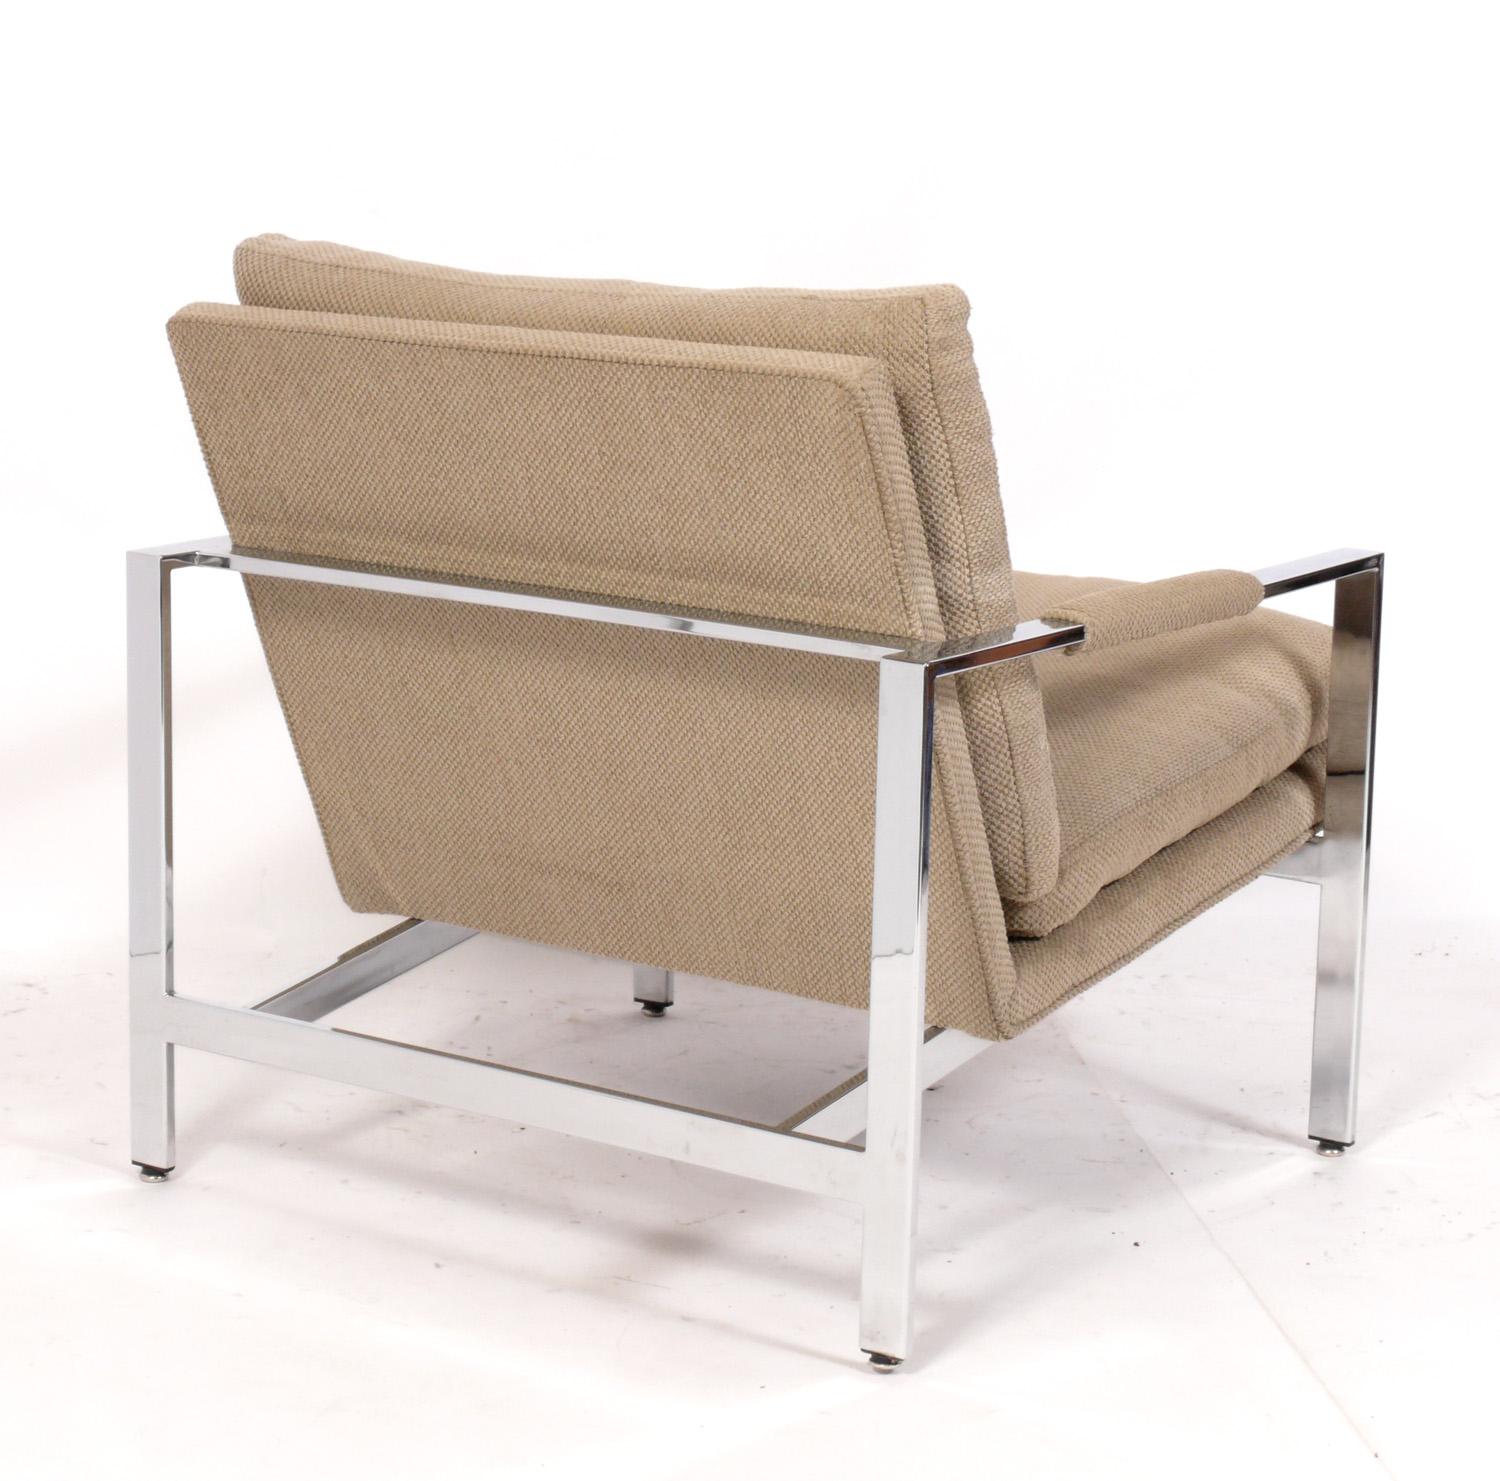 Plated Milo Baughman Pair of Chrome Lounge Chairs Reupholstered In Your Fabric For Sale